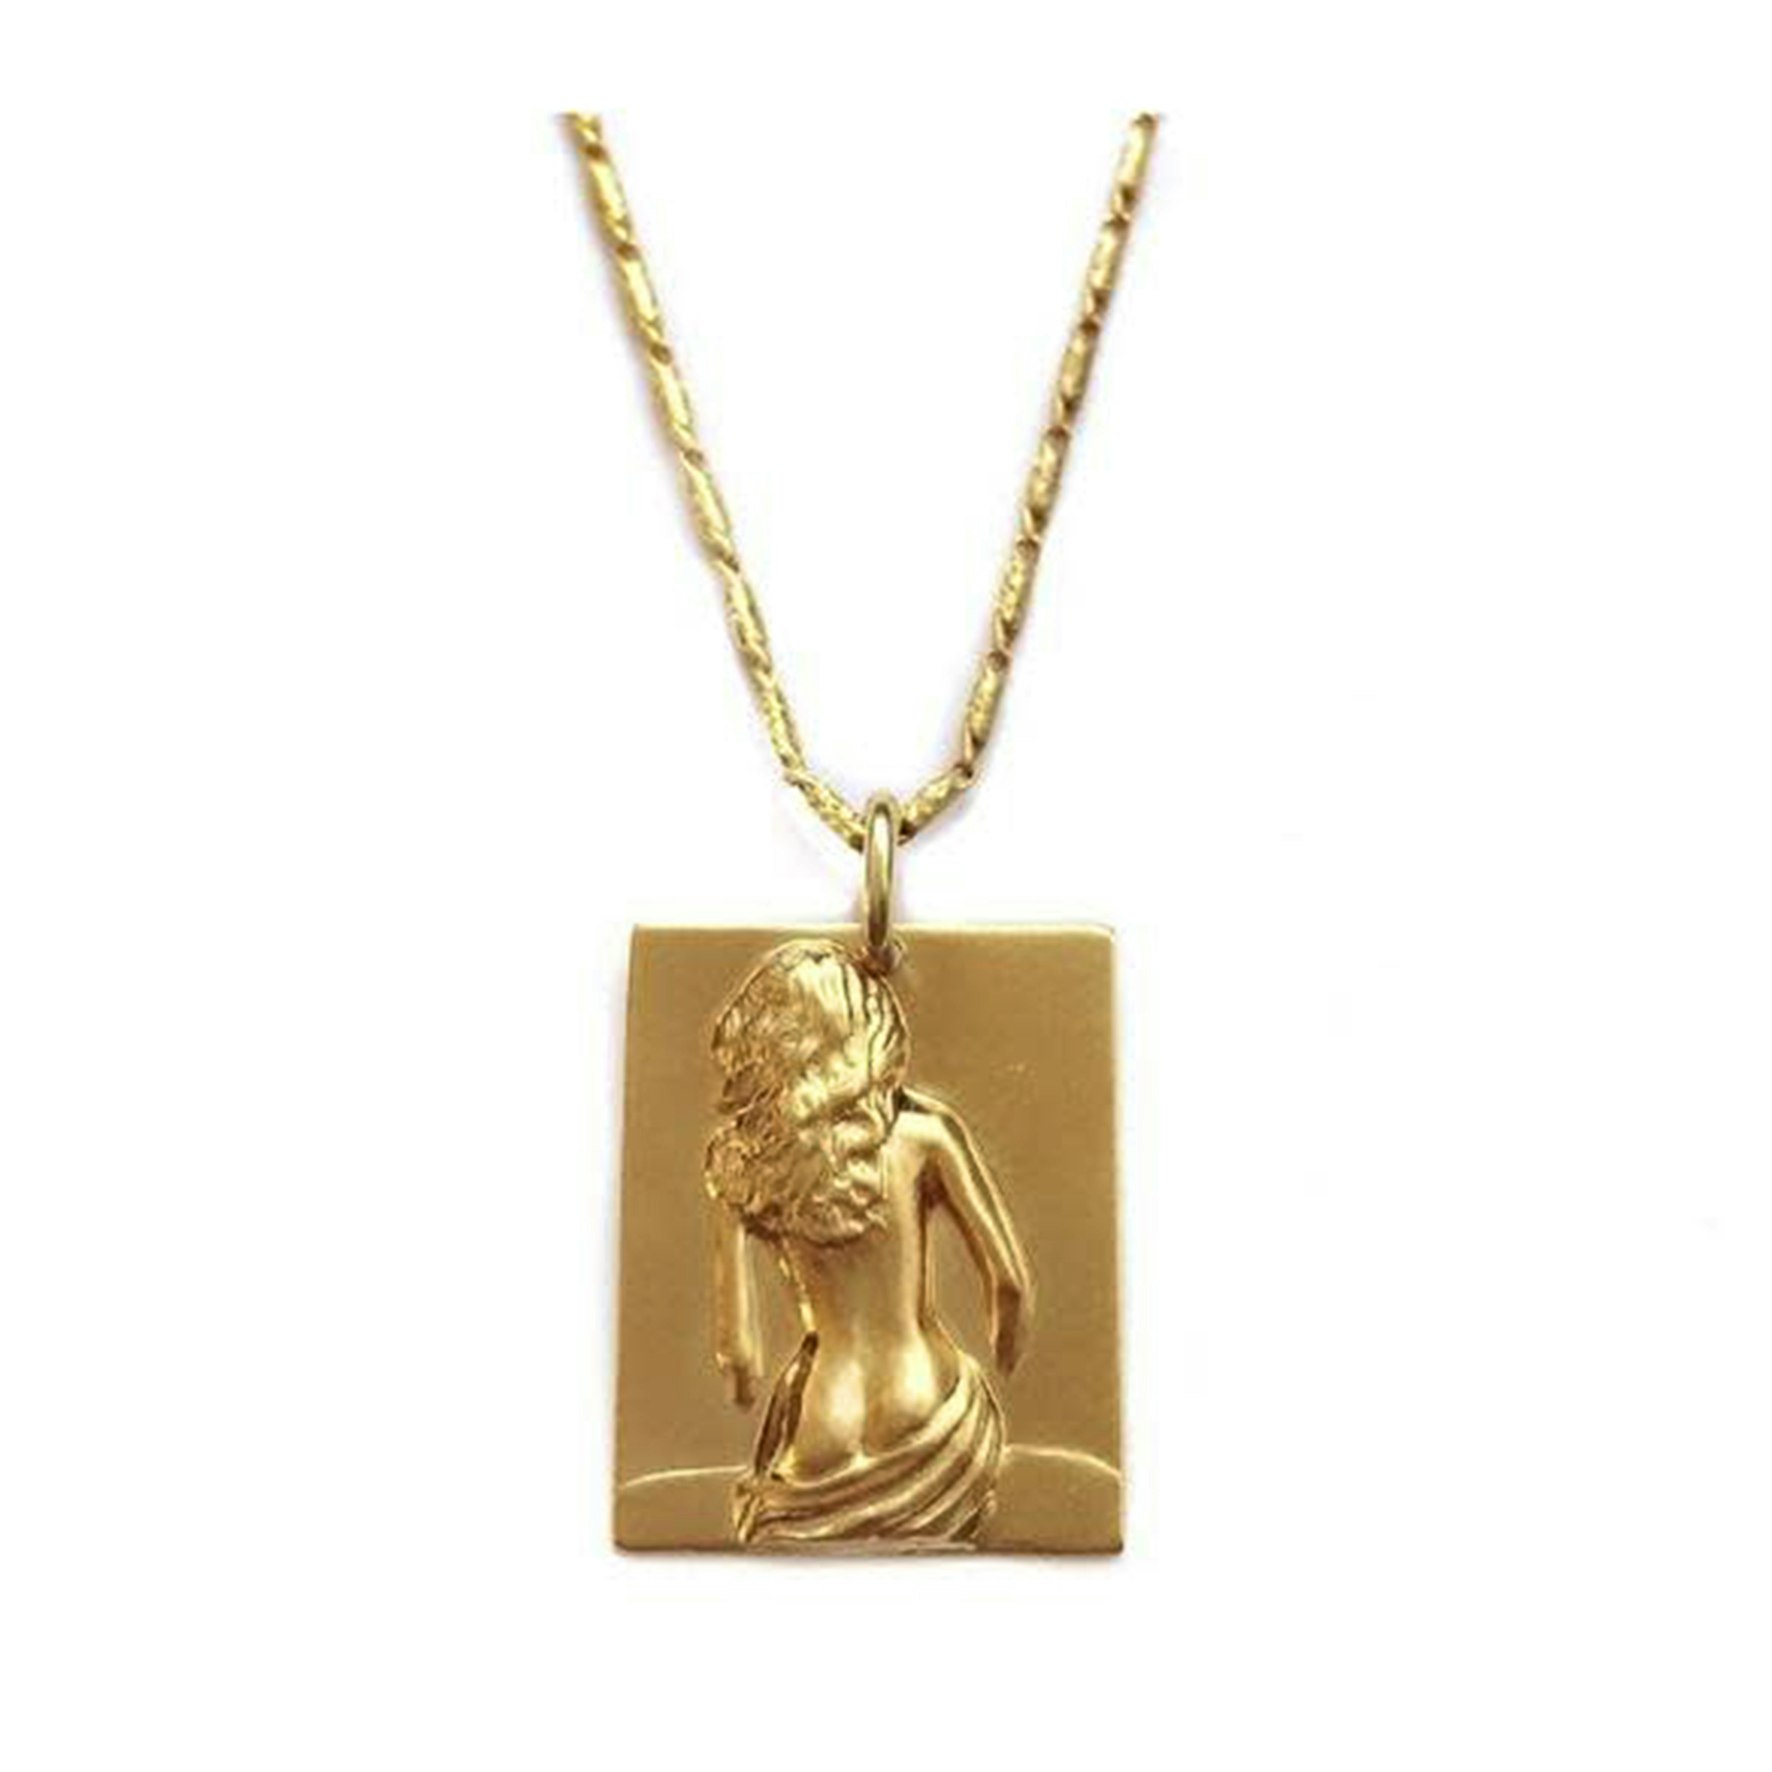 Lady Necklace from Pico in Goldplated Brass